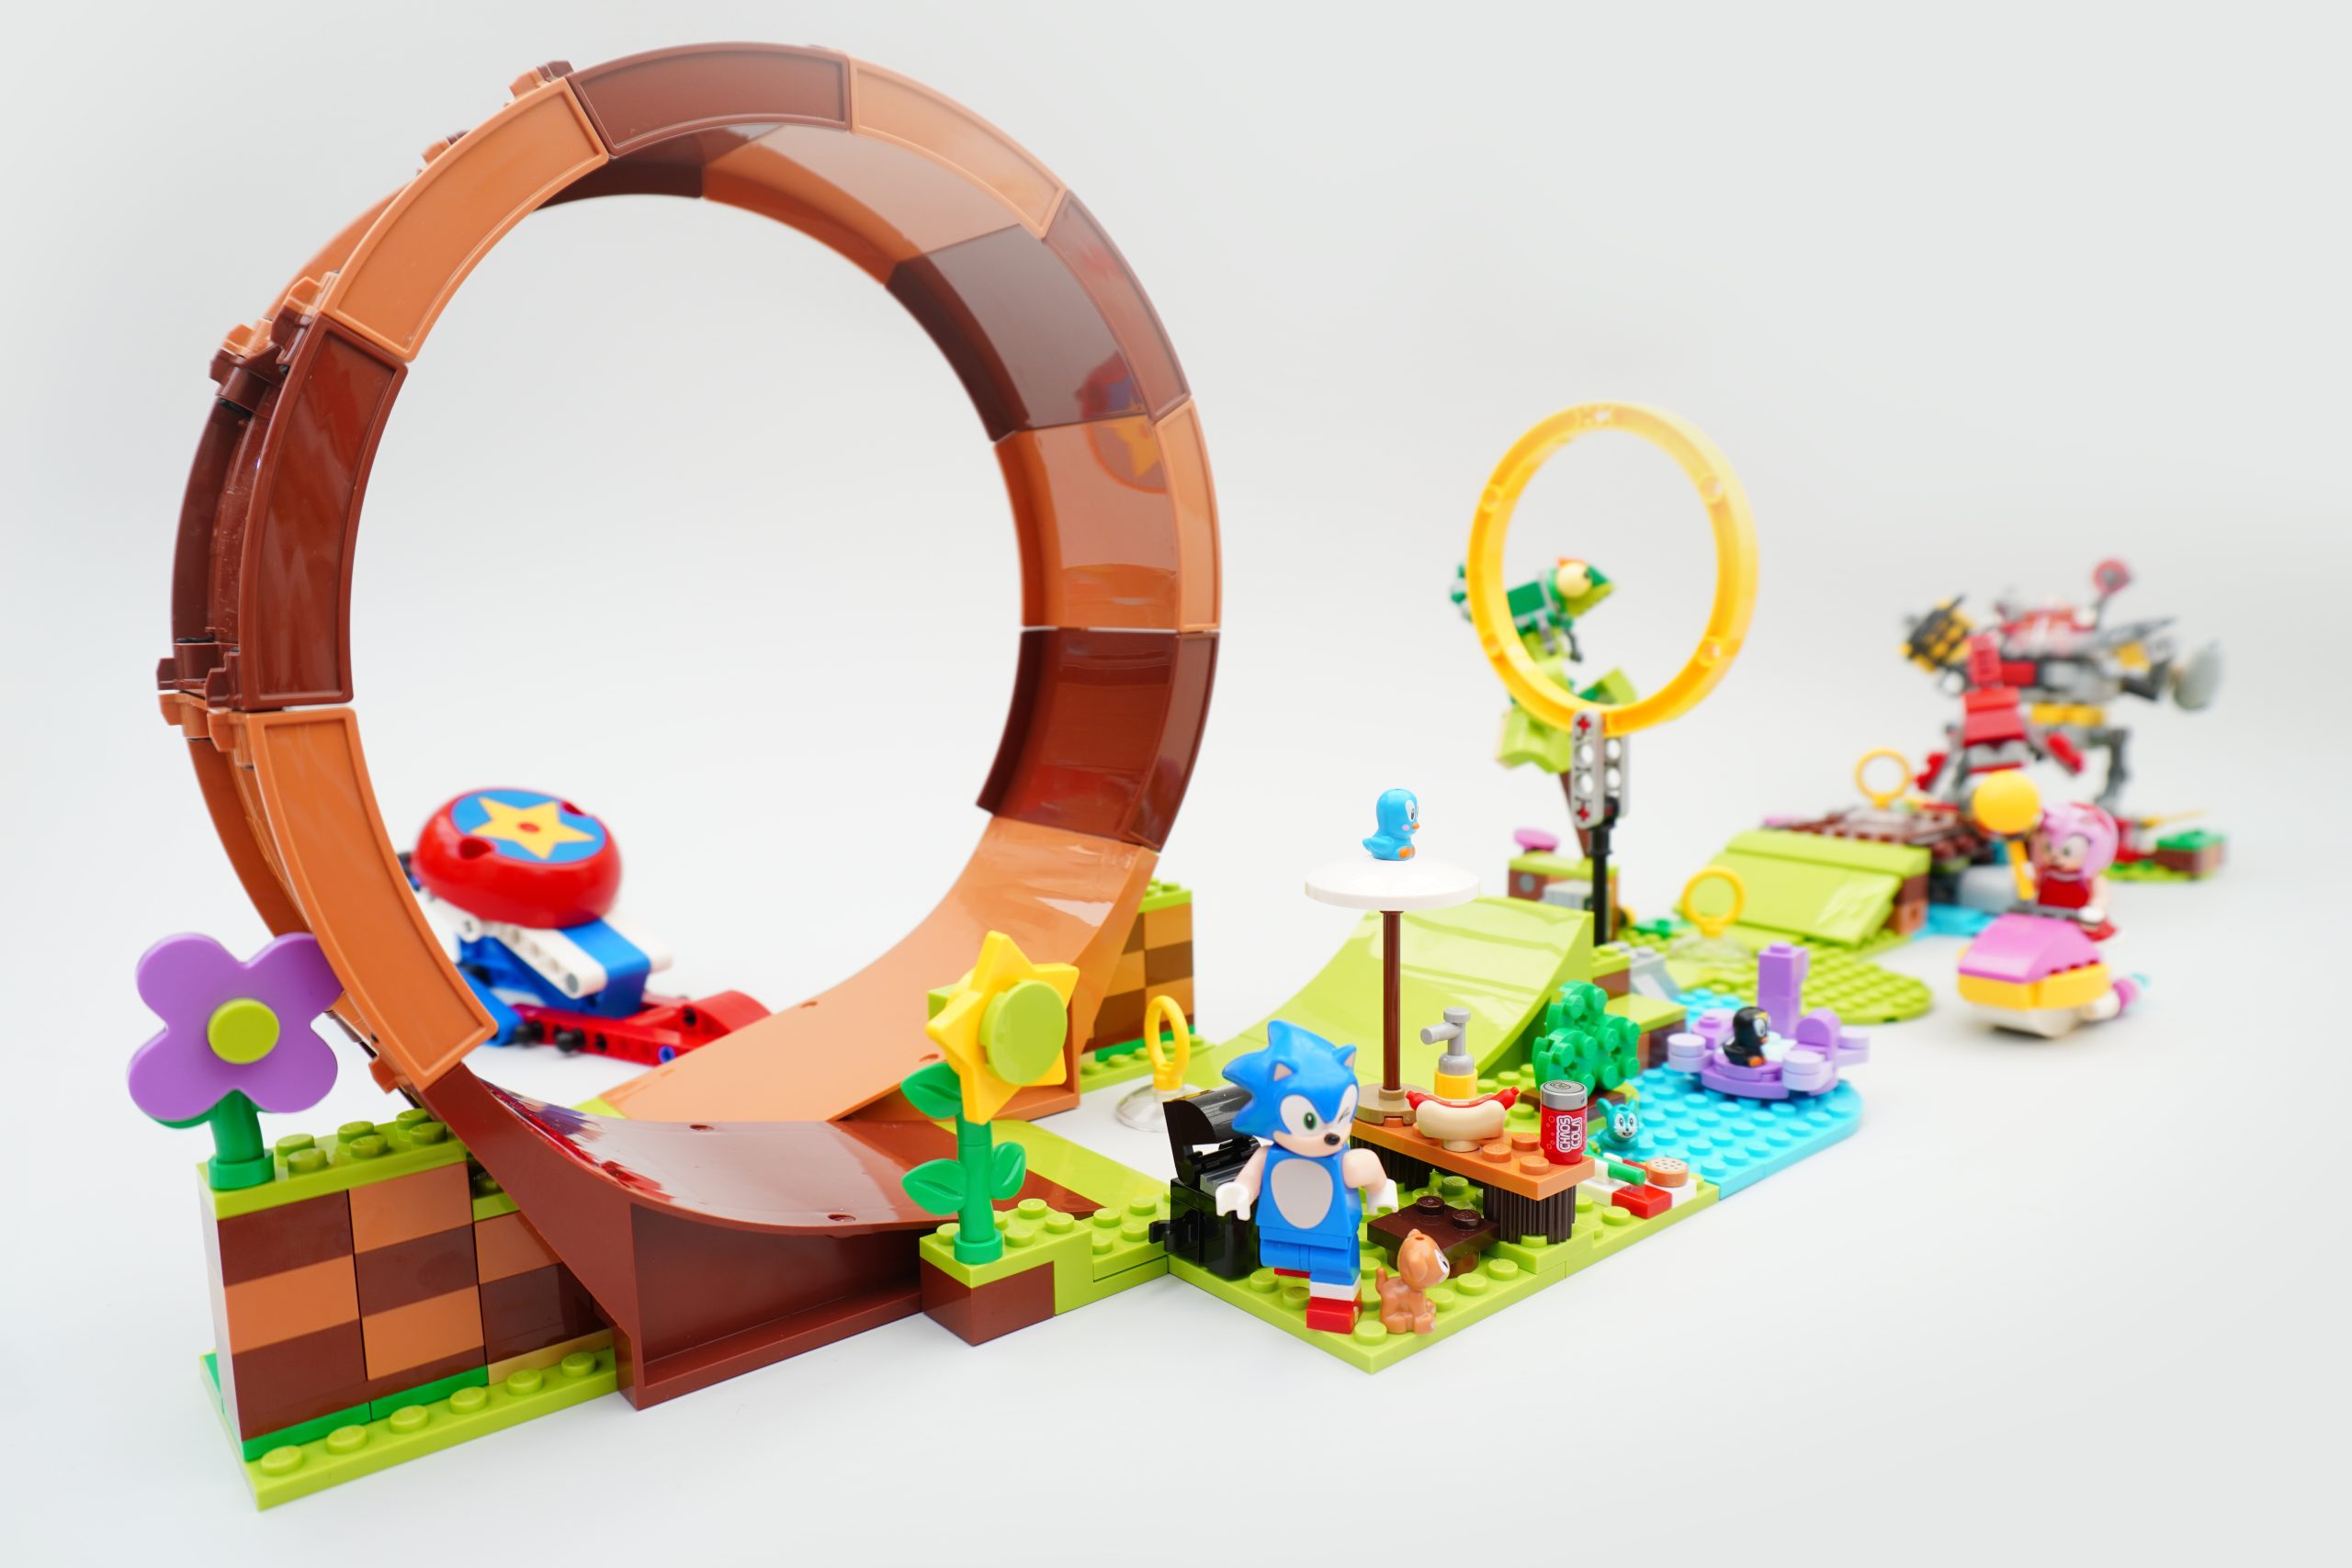 Reminder: Lego's Sonic The Hedgehog - Green Hill Zone Set Is Now Available